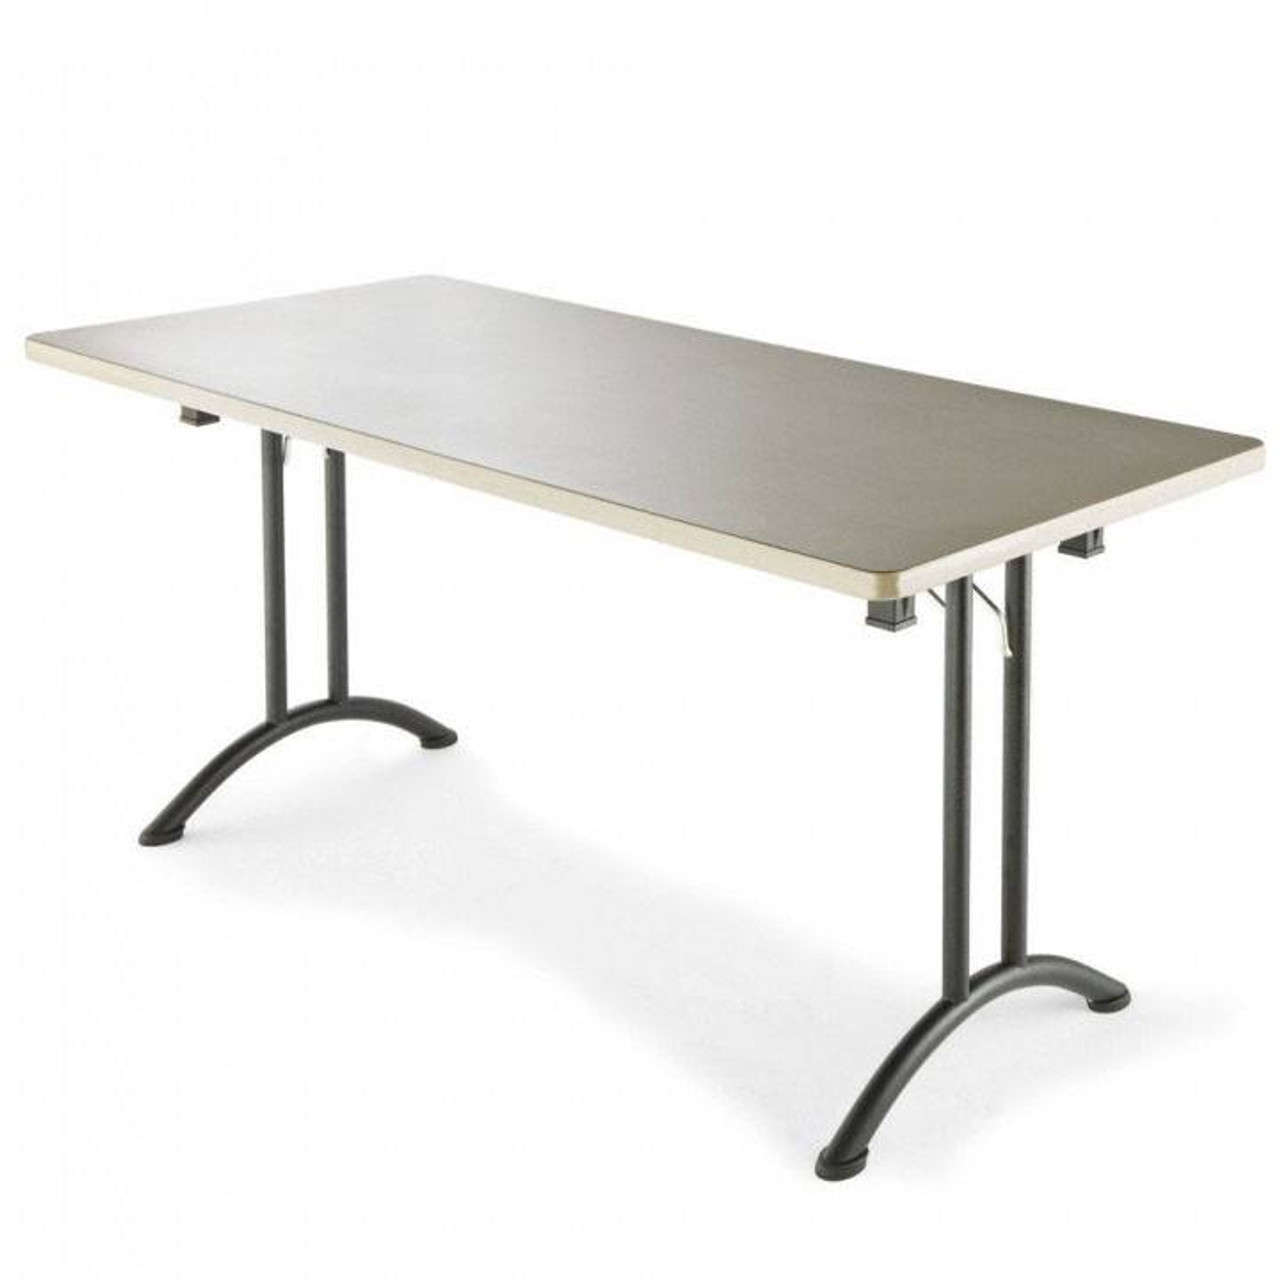 Pull-out table and folding fitting, with folding table leg - in the Häfele  America Shop